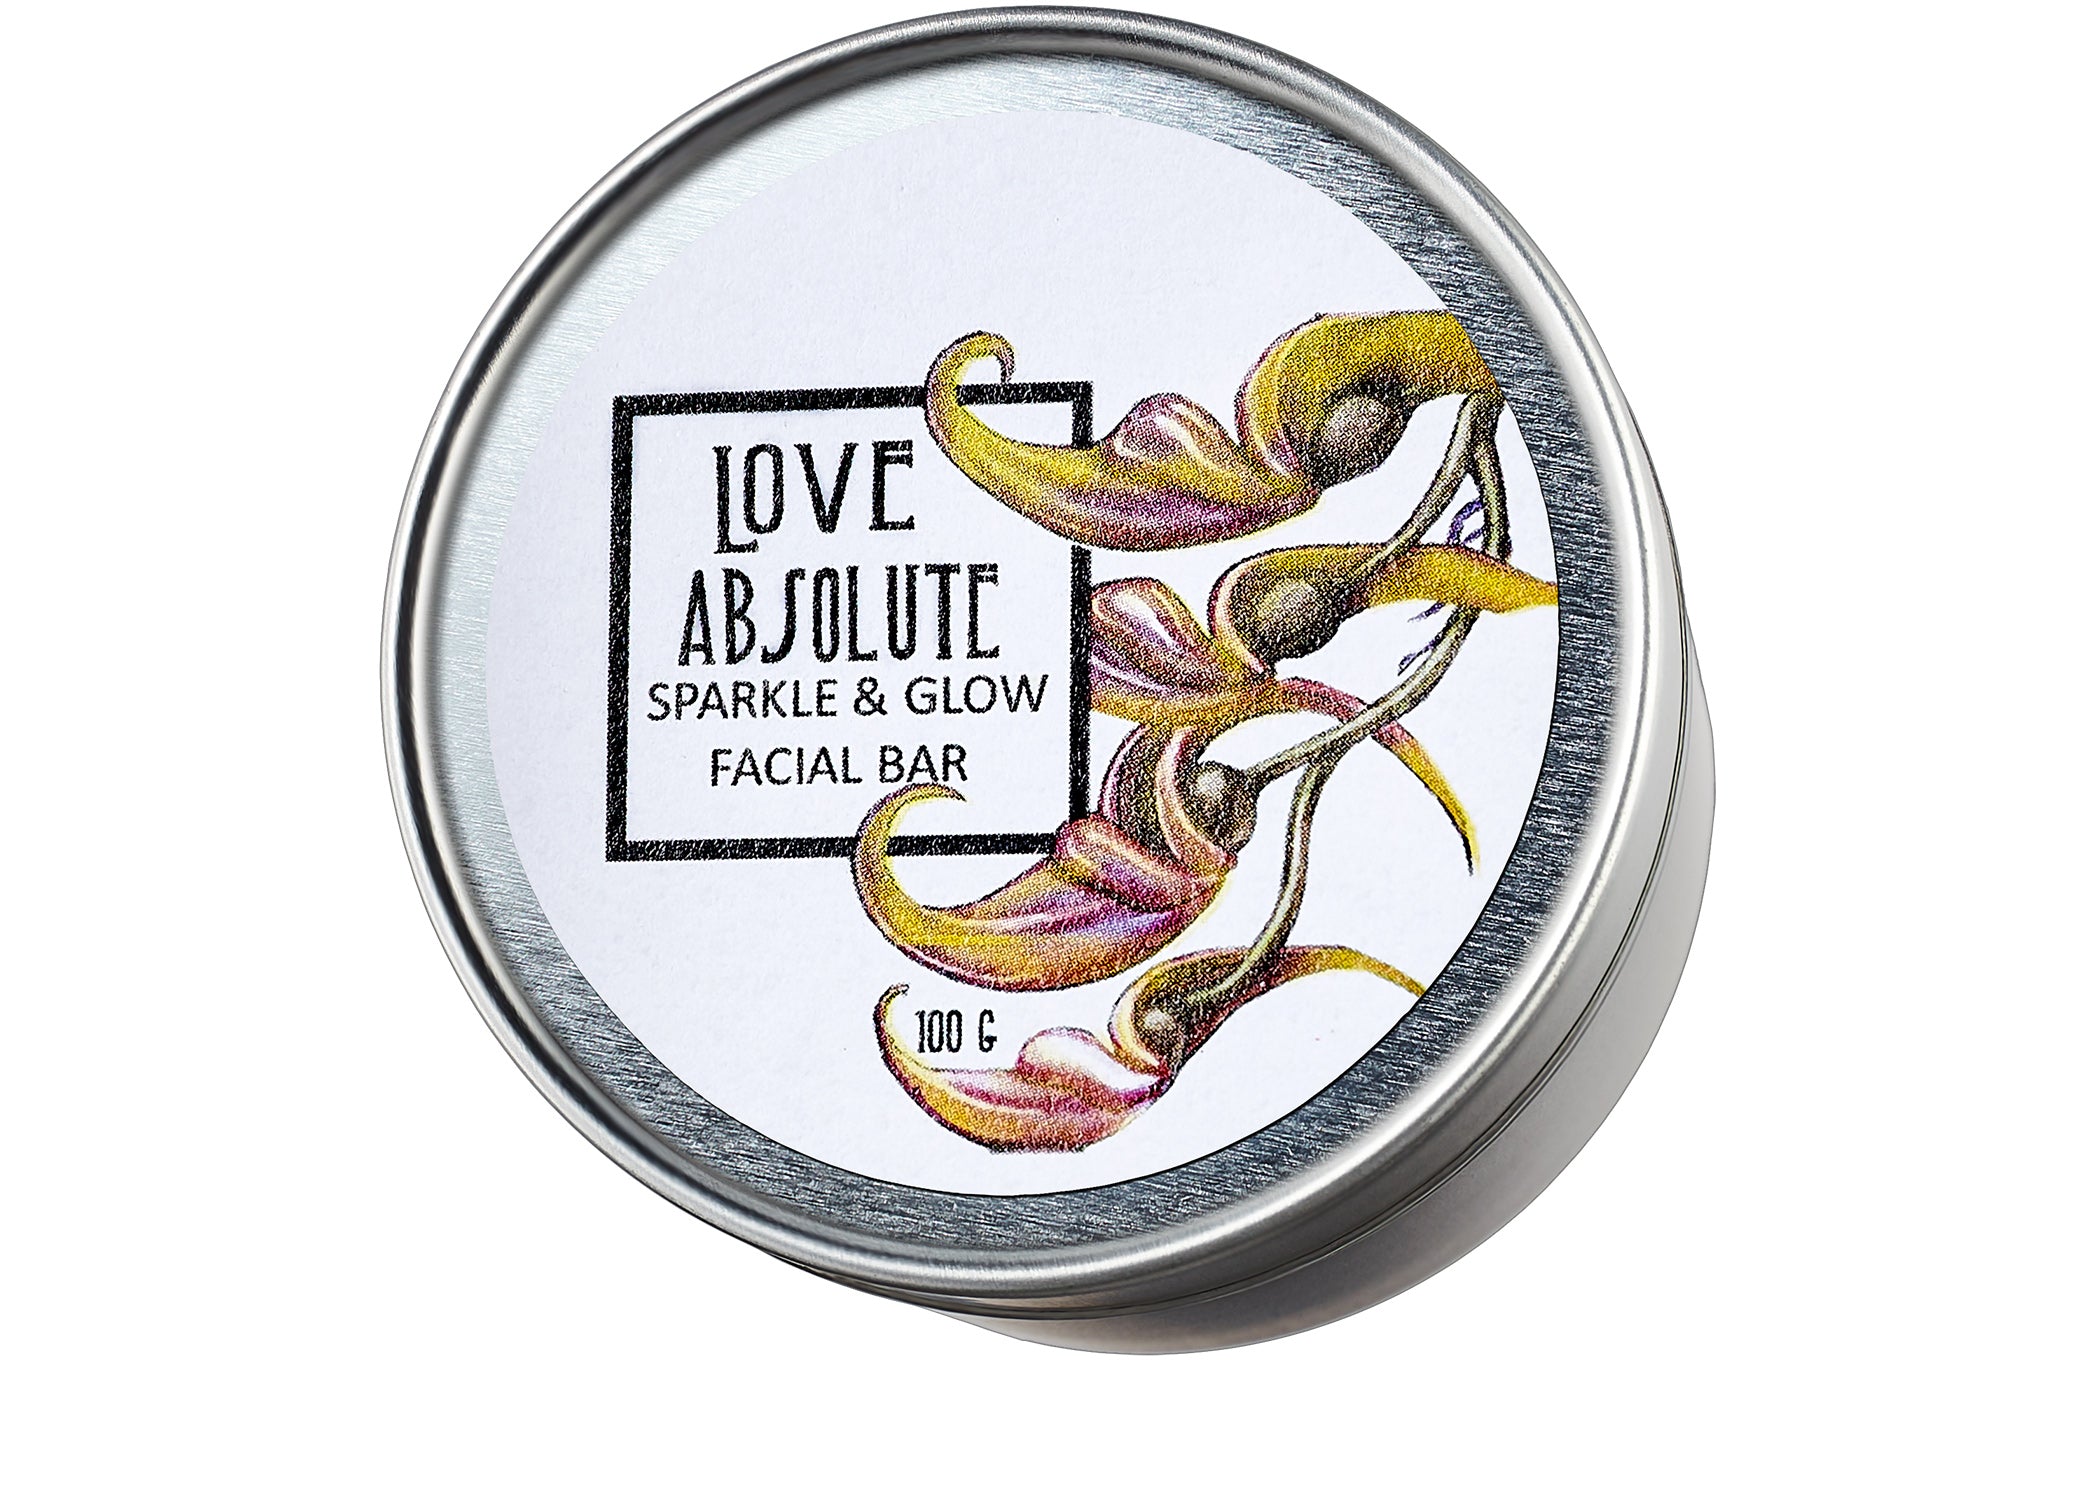 Sparkle and Glow Facial Bar - Love Absolute